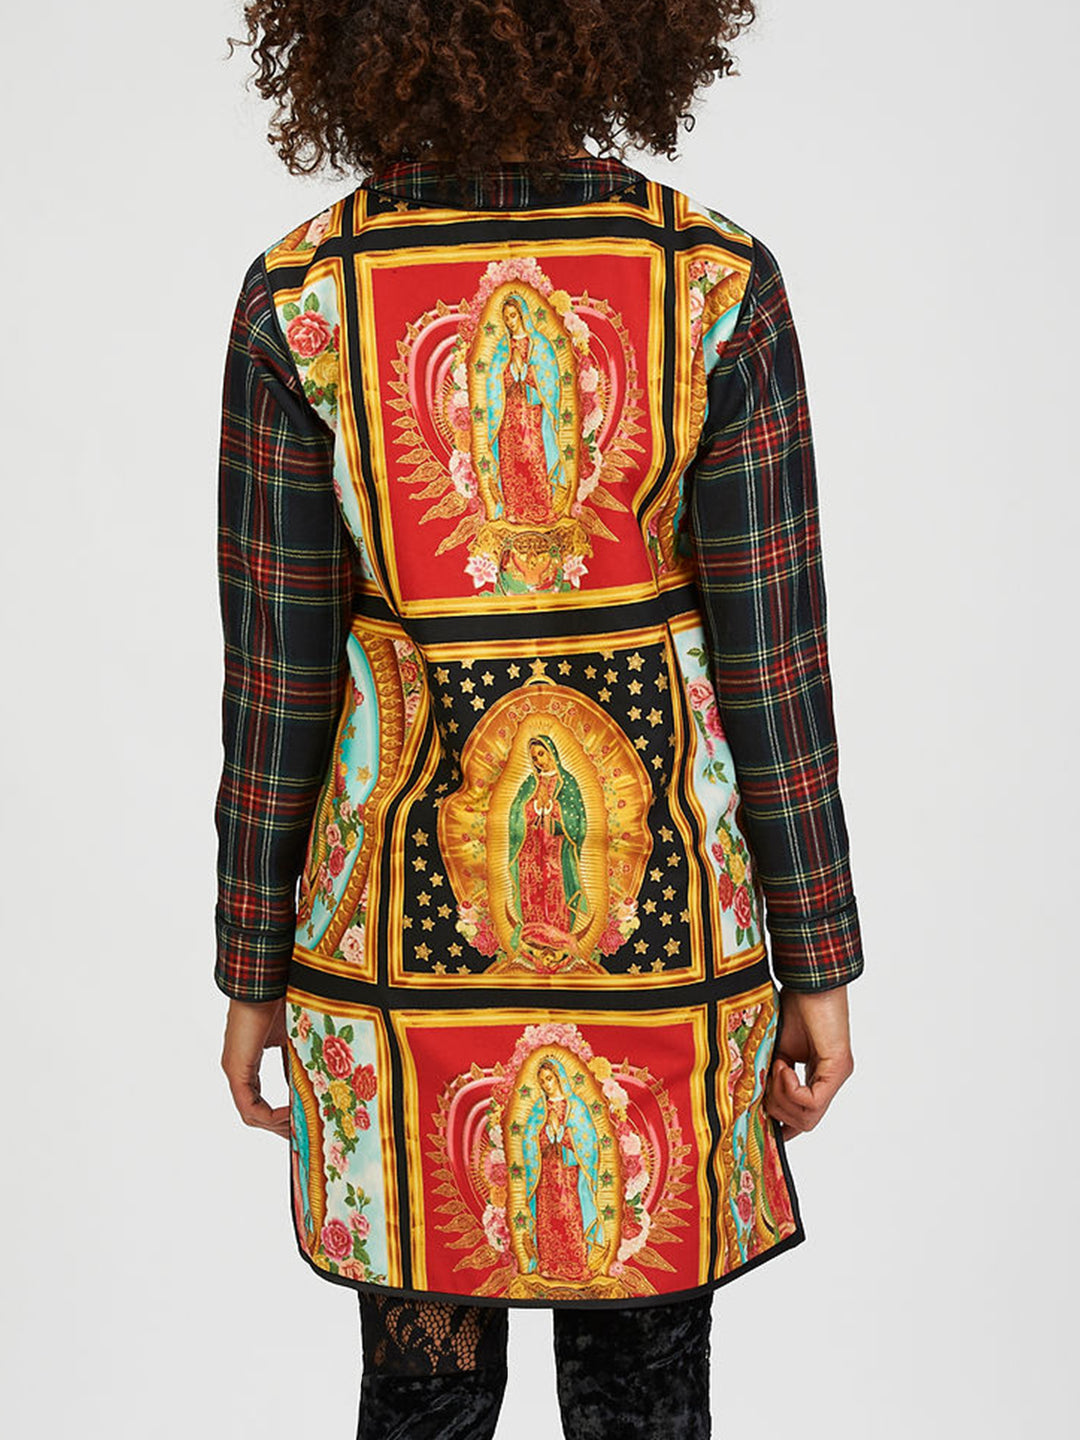 Our lady of Guadalupe dress